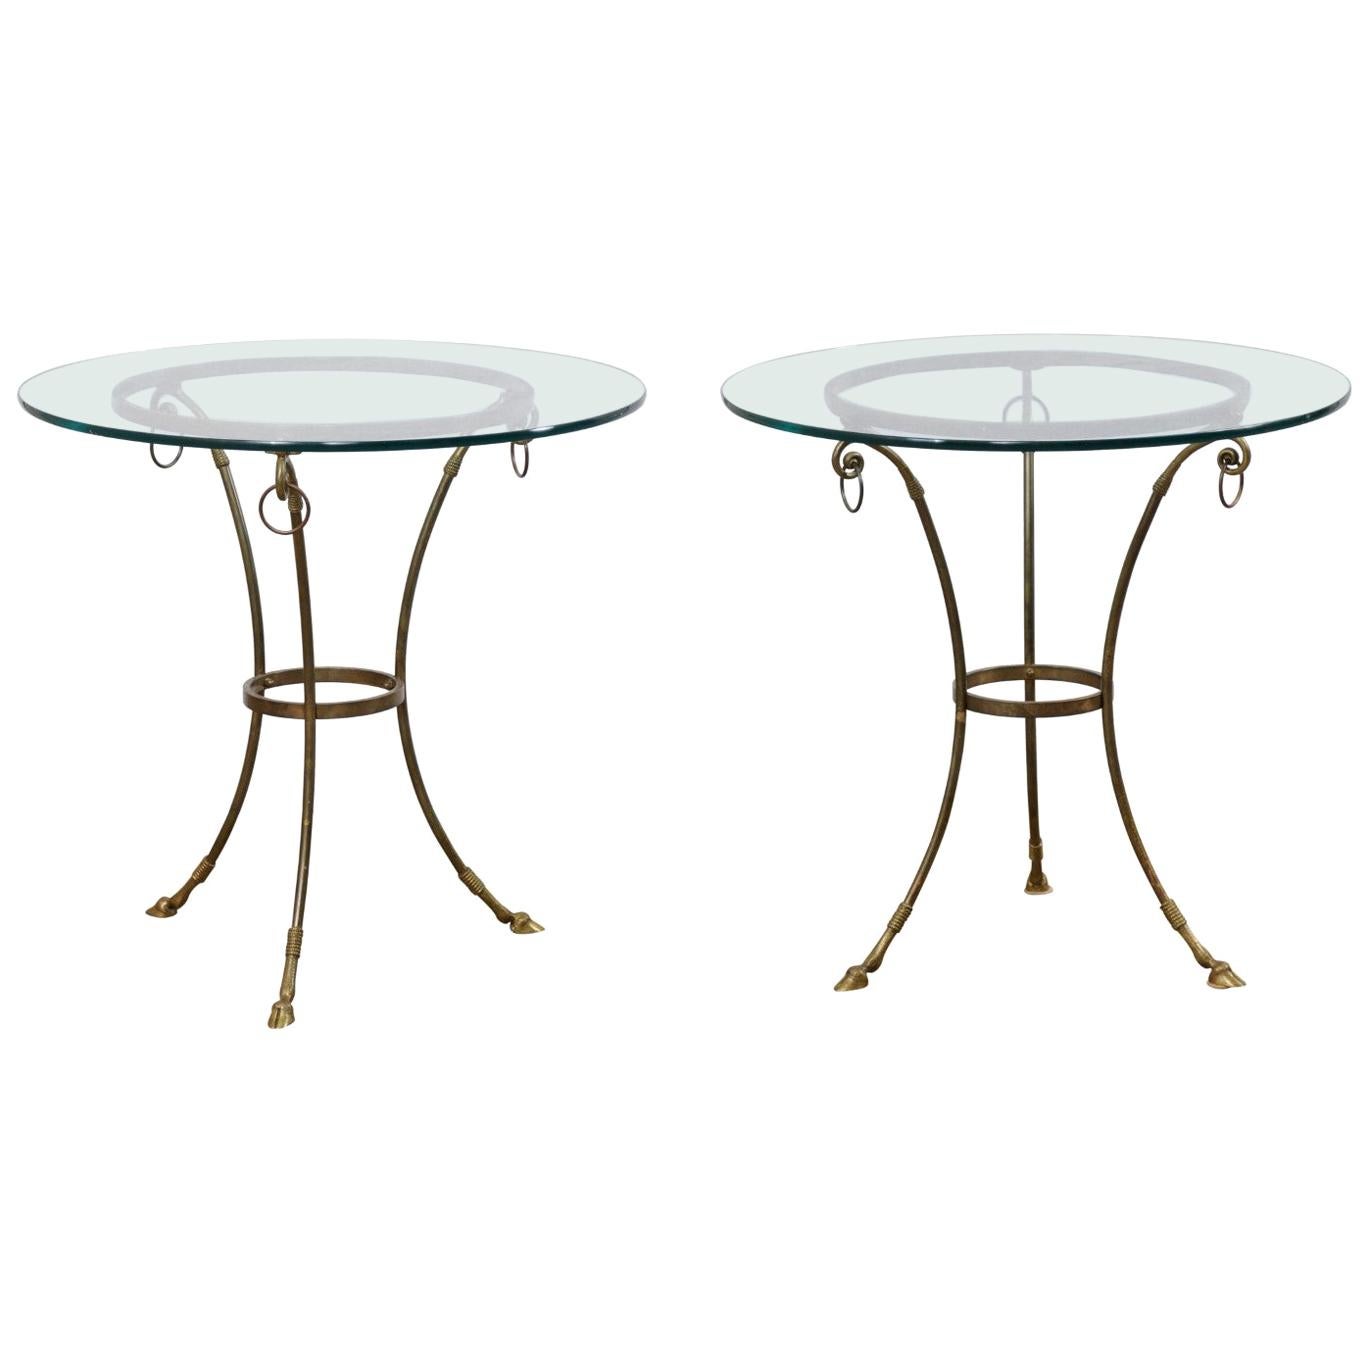 Italian Pair of Round Brass Tables with Hooved Feet and Glass Tops For Sale